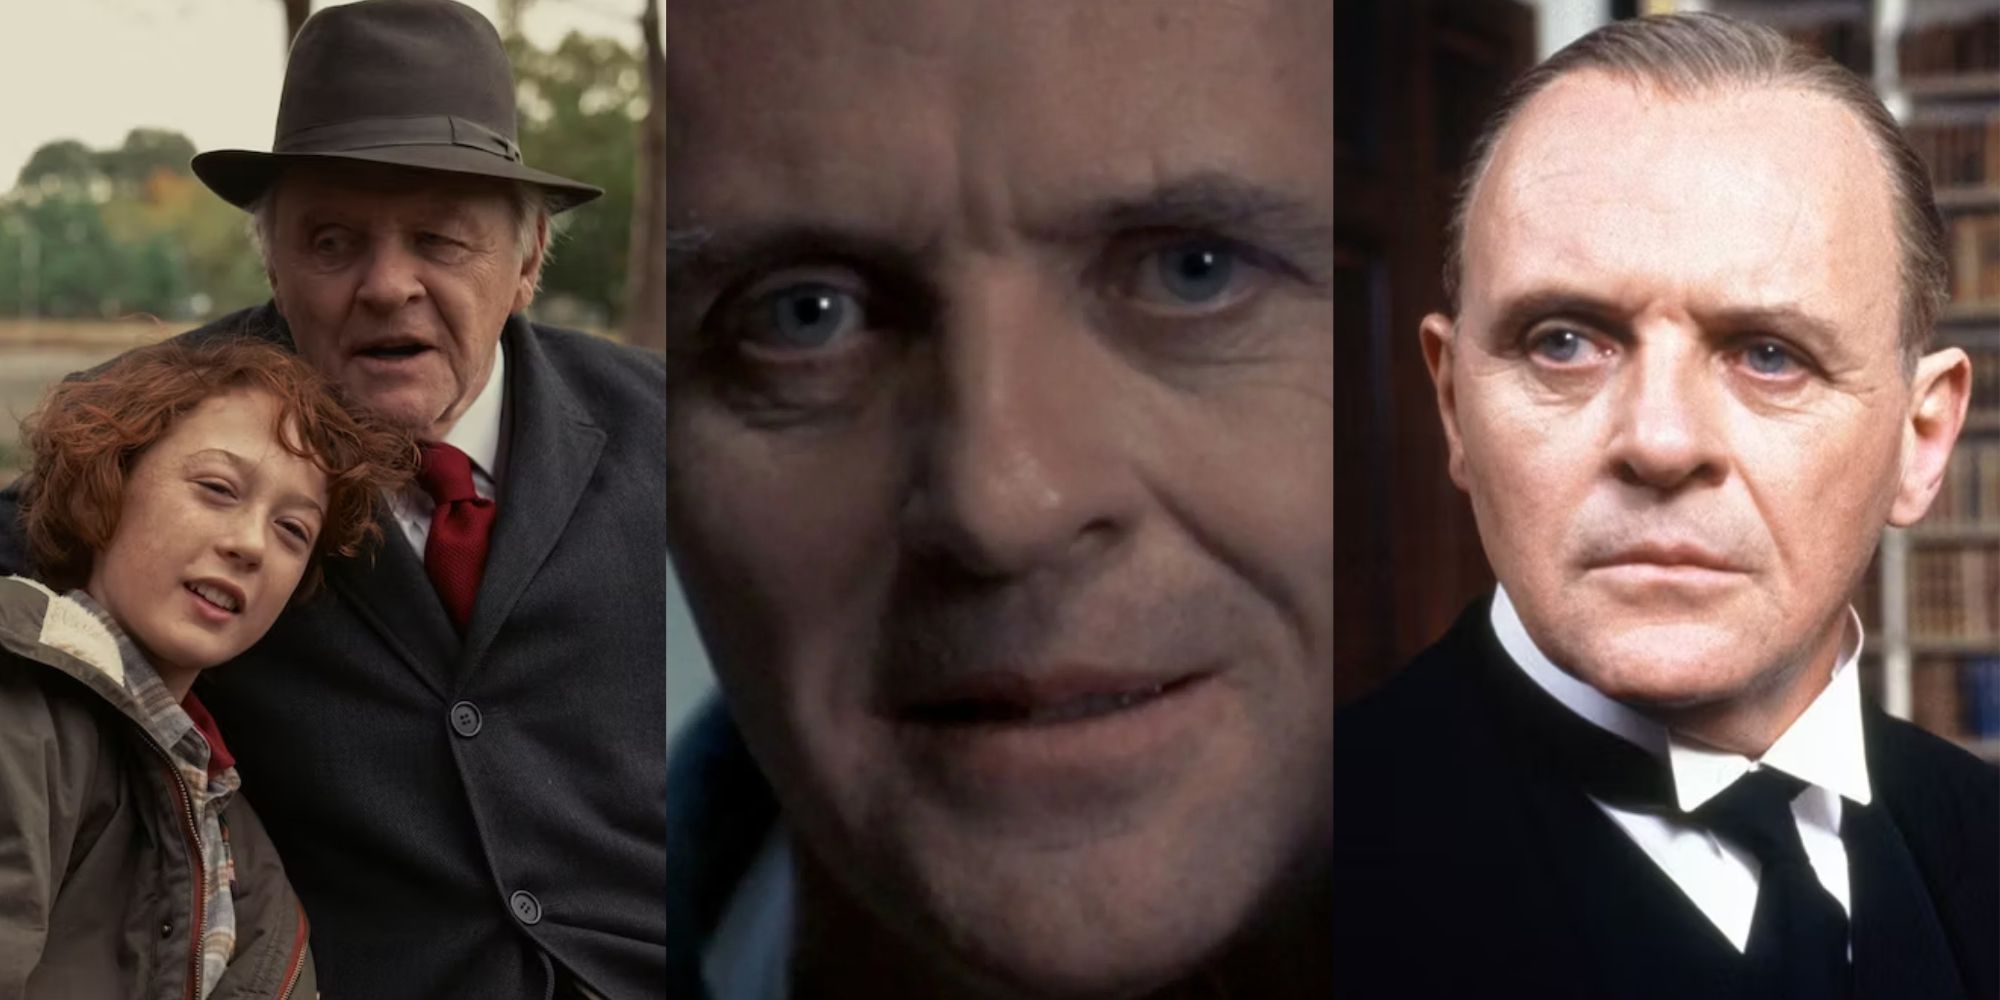 15 Best Anthony Hopkins Movies, Ranked By Rotten Tomatoes Score